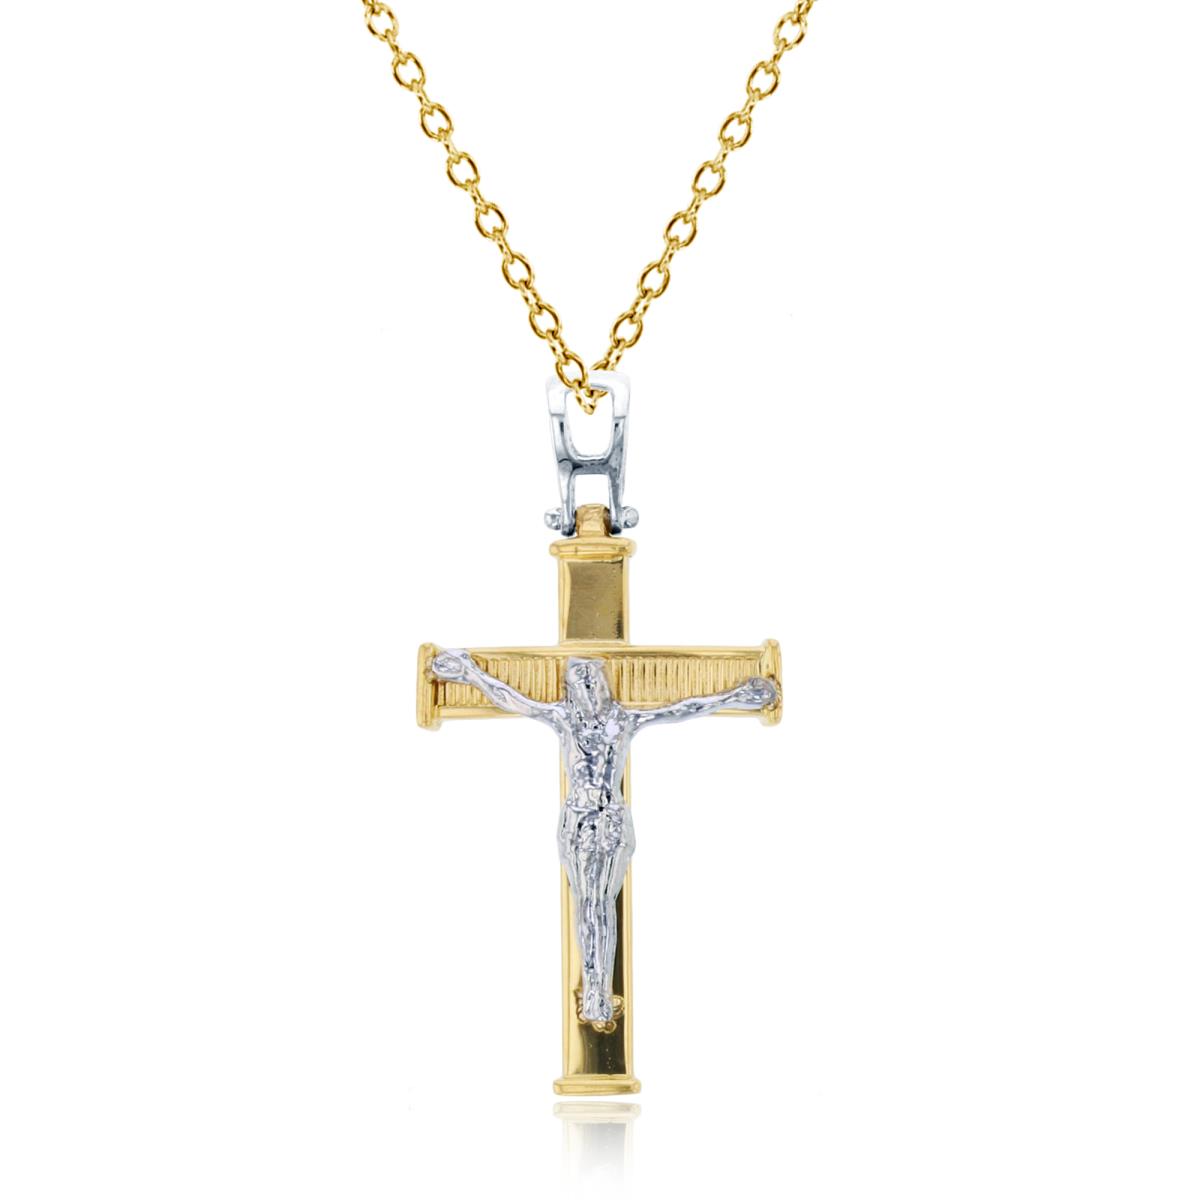 10K Two-Tone Gold Polished & Textured Crucifix Cross 18" Necklace